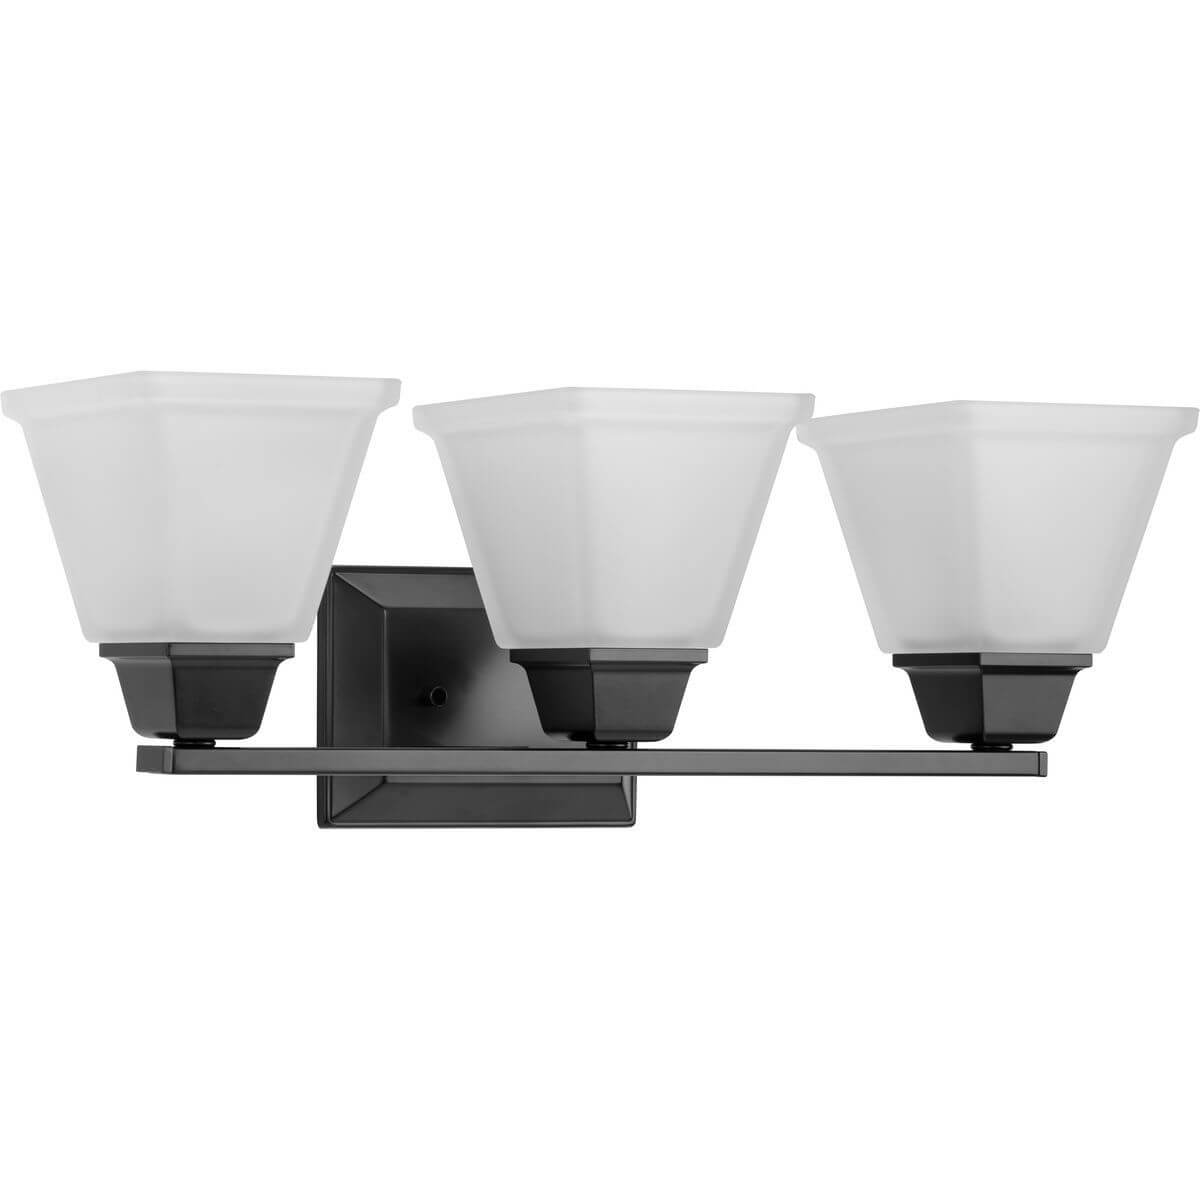 Progress Lighting Clifton Heights 3 Light 23 inch Bath Vanity Light in Matte Black with Etched Glass P300160-31M